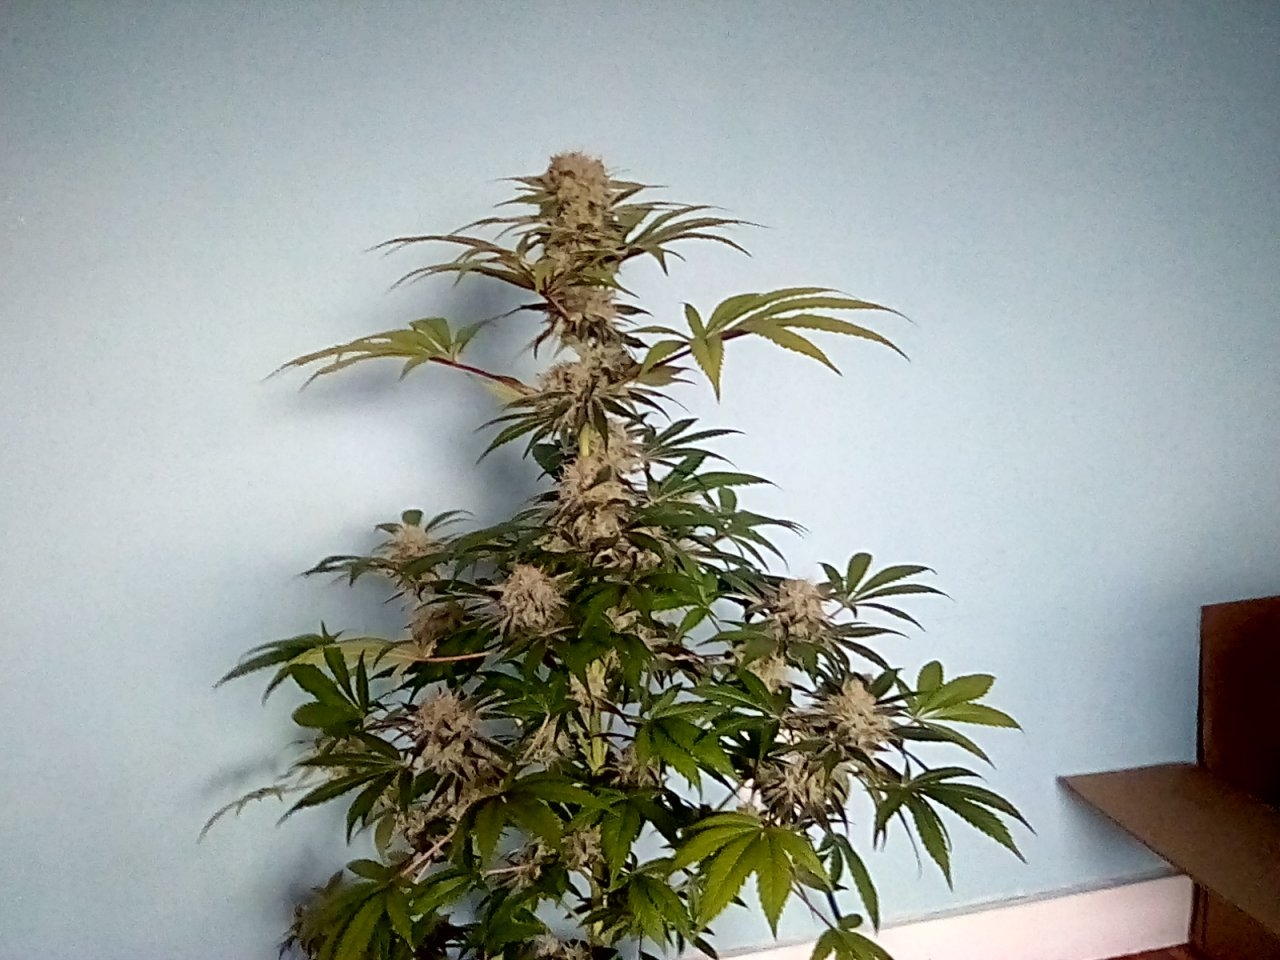 Day 56 of the flip Fruity Pebbles